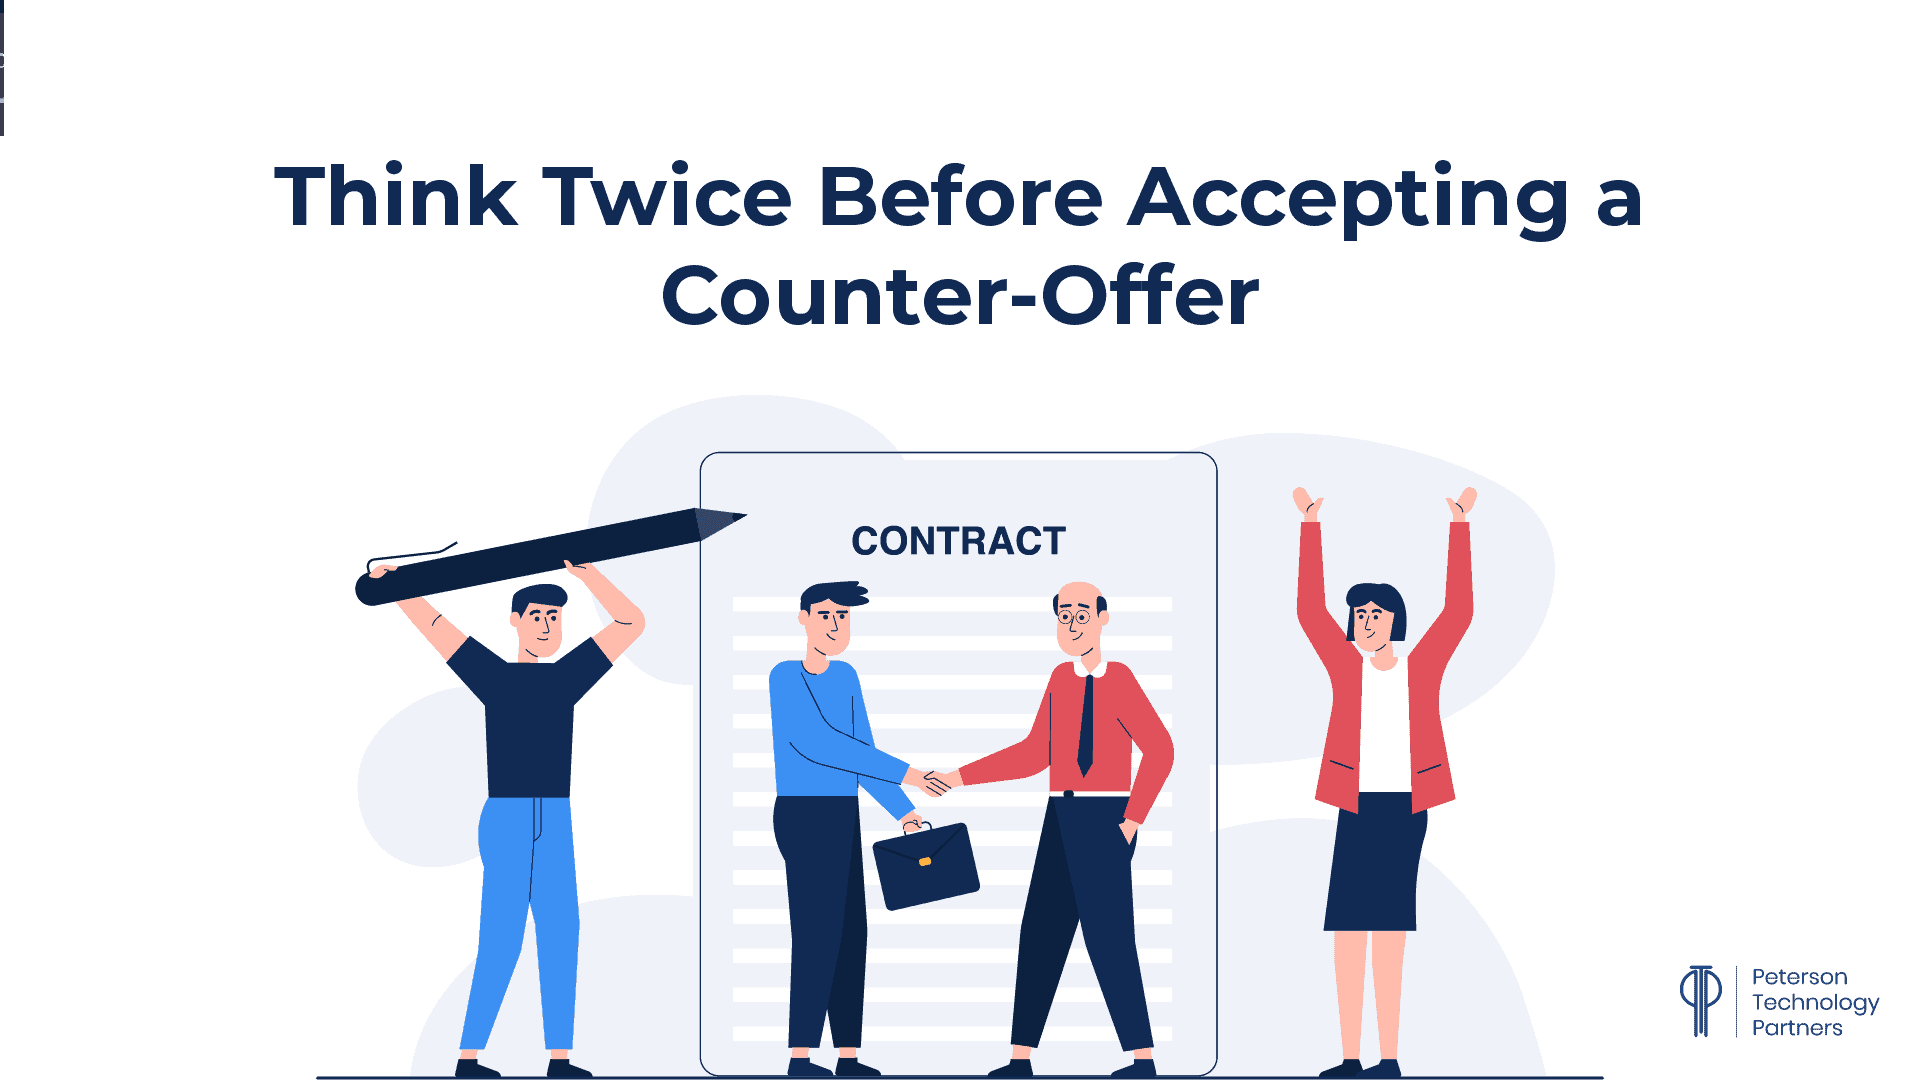 Think Twice Before Accepting a Counter-Offer